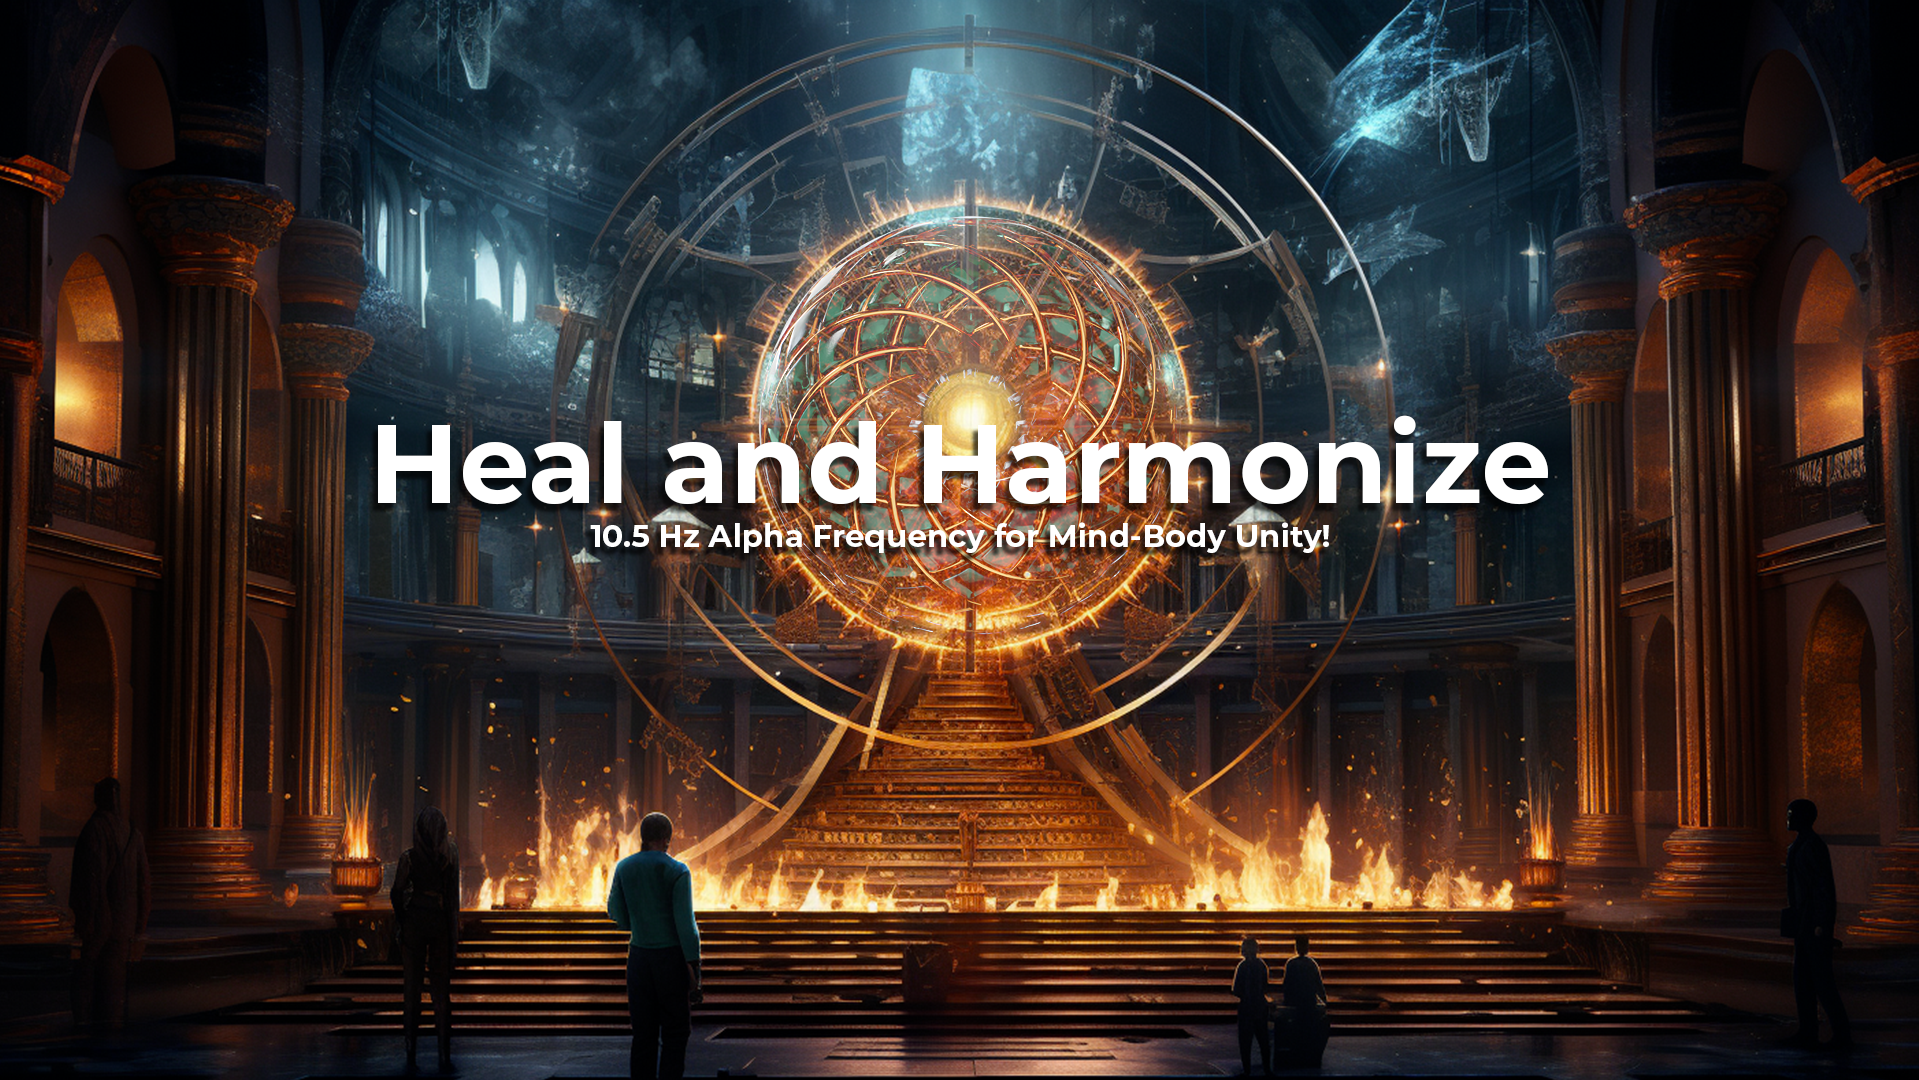 Heal and Harmonize: 10.5 Hz Alpha Frequency for Mind-Body Unity